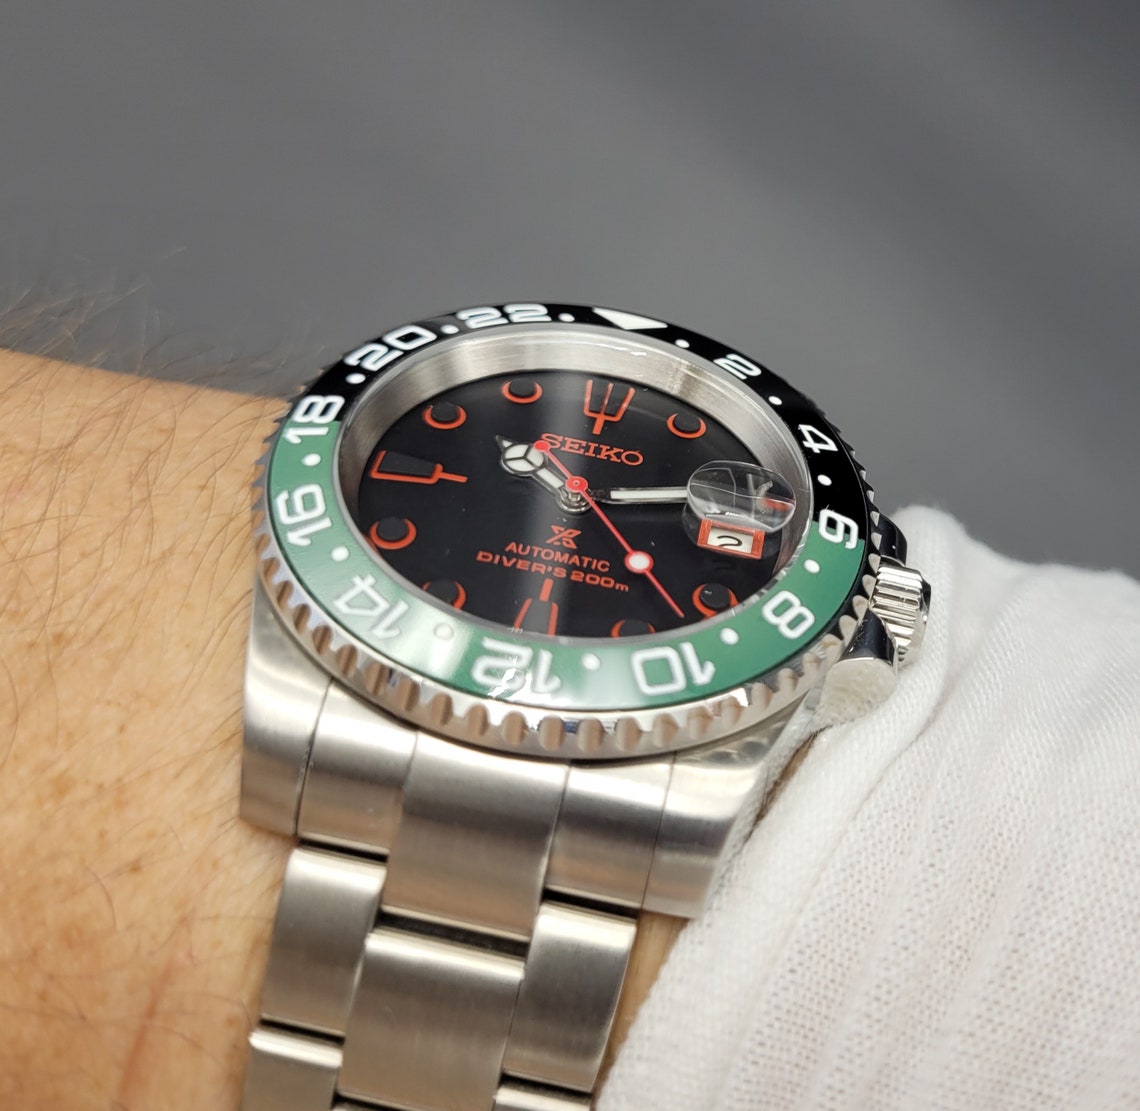 This is a one of a kind custom Made Seiko Mod Sprite style watch. 